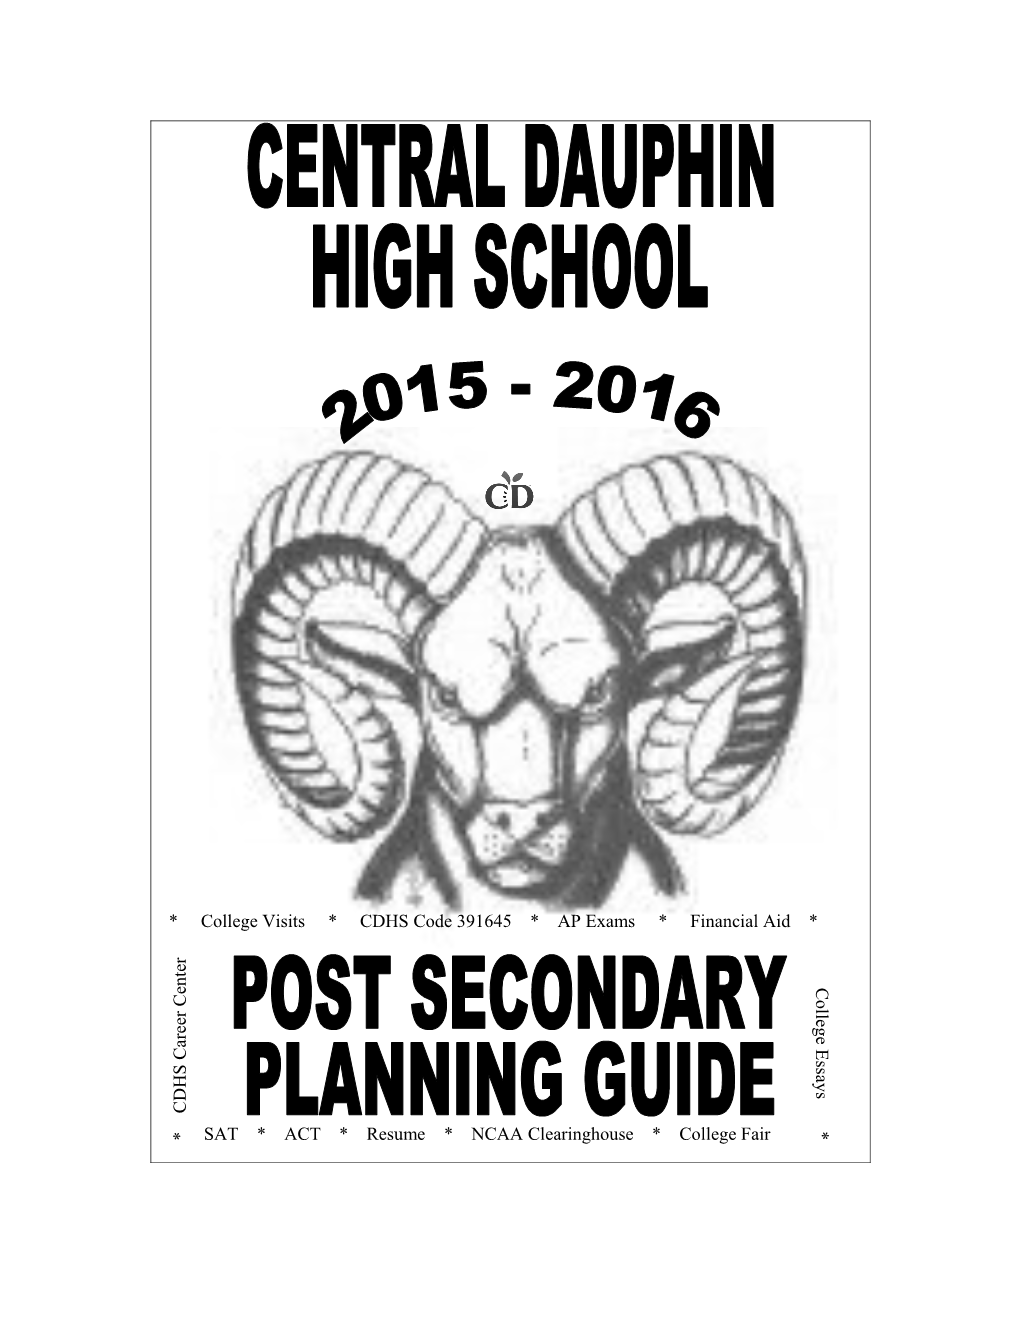 1.Learn the Central Dauphin High School Code Number: 391645